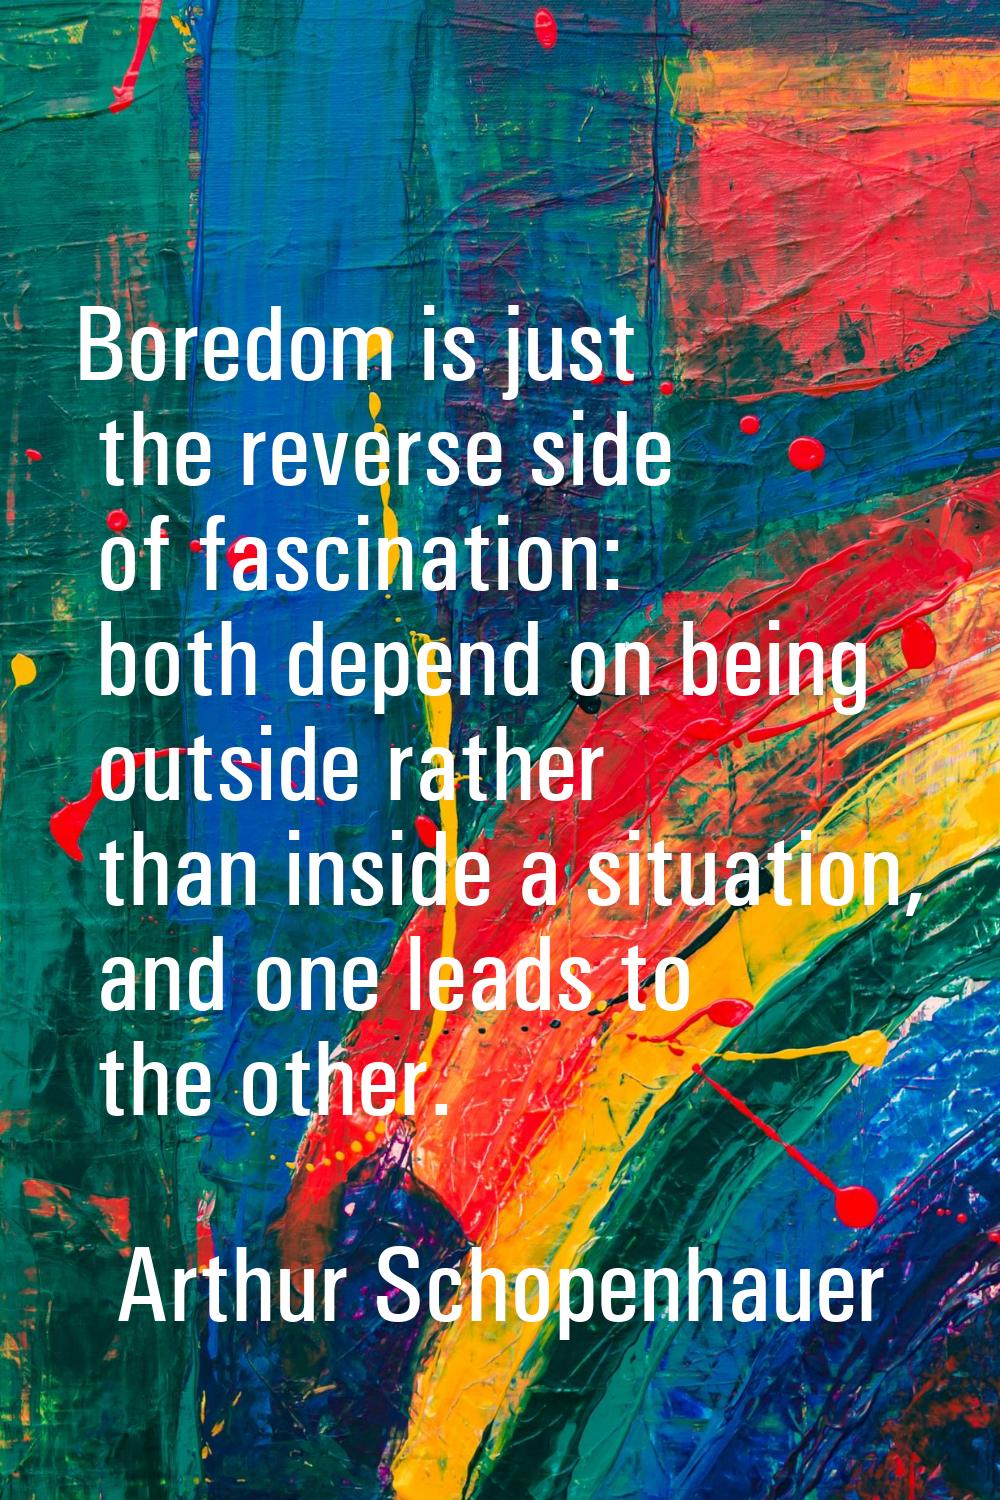 Boredom is just the reverse side of fascination: both depend on being outside rather than inside a 